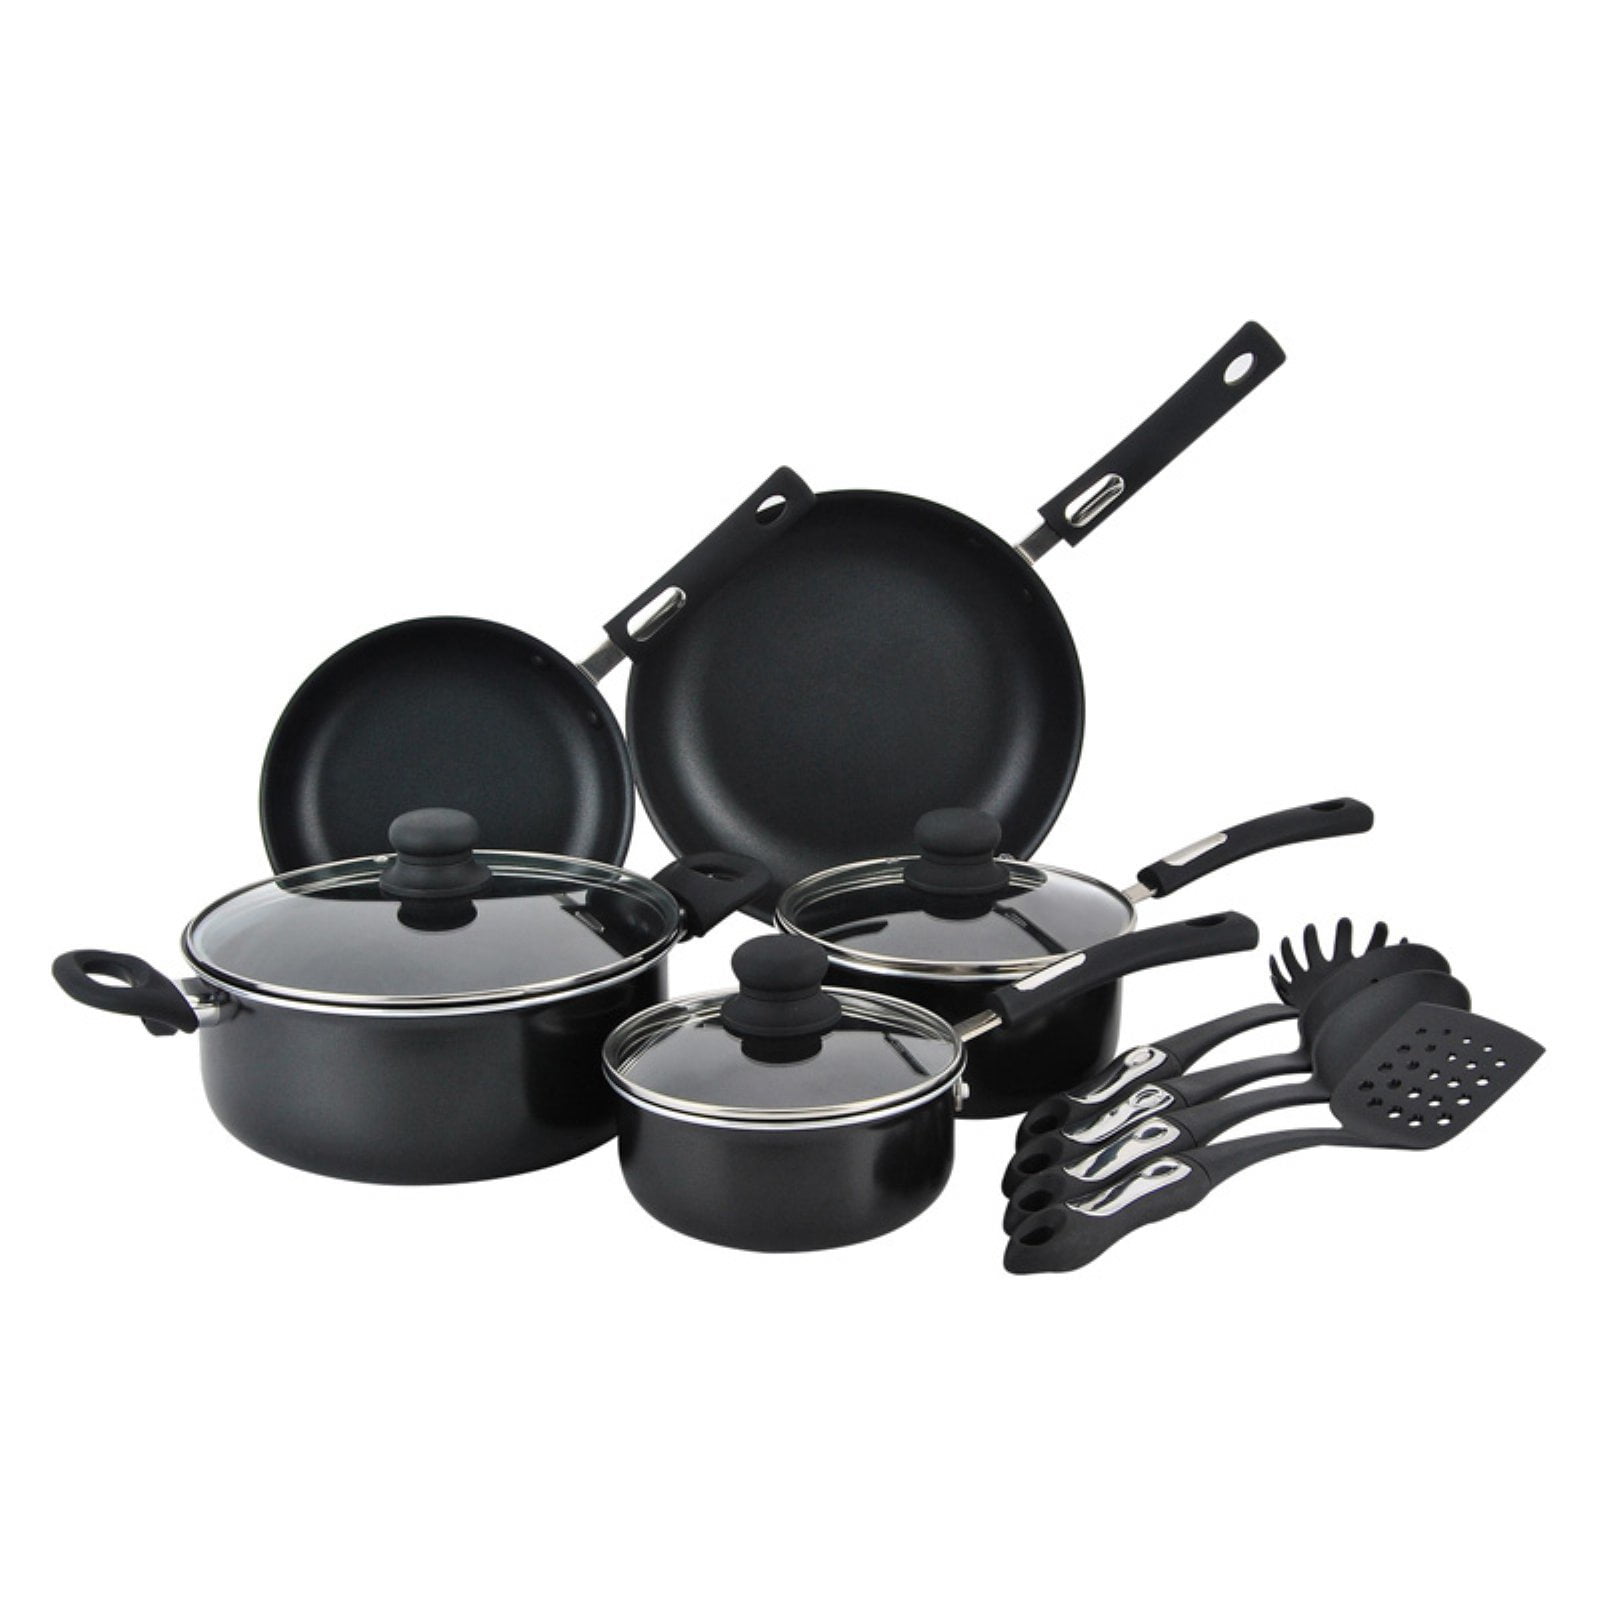 12 Piece Cookware Set, Cookware Set POTS and Pans, Kitchenware, Good  Quality, Affordable, Simple and Modern, Healthy, Black - AliExpress